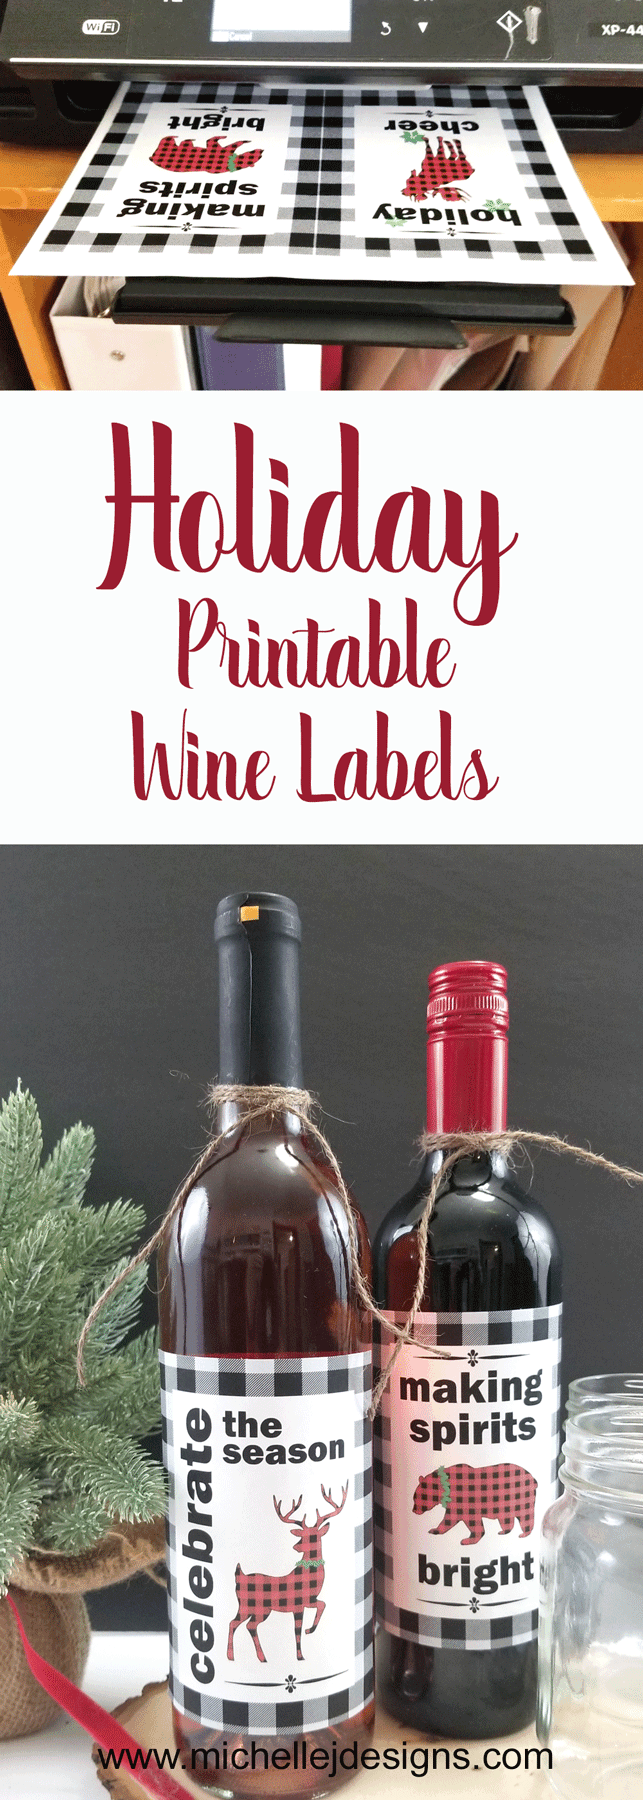 Finished holiday wine with festive holiday wine labels.